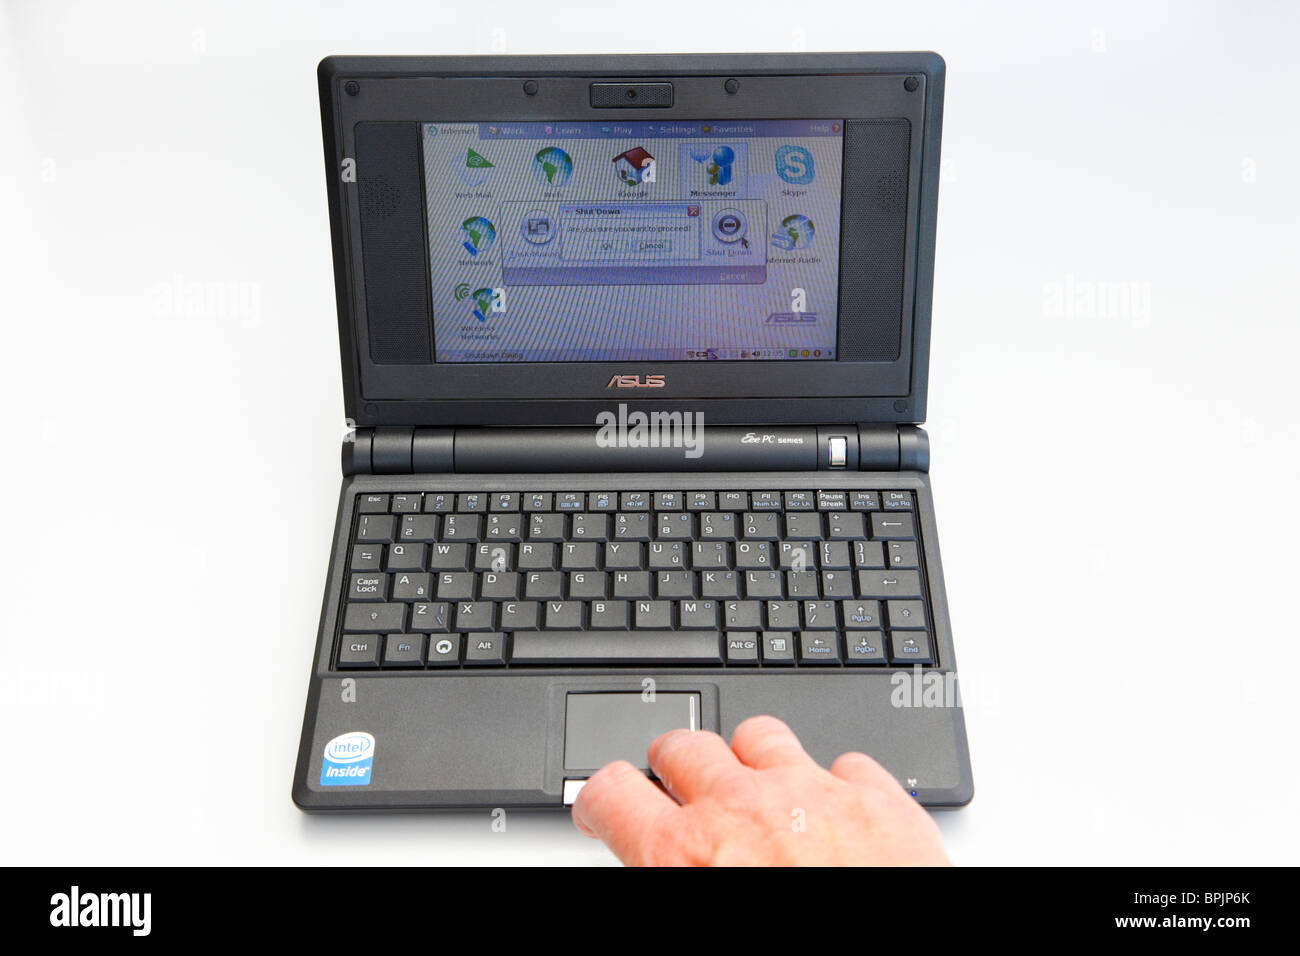 Mature person's hand using a small Asus netbook EEE PC computer running Linux operating system showing shut down screen. Stock Photo